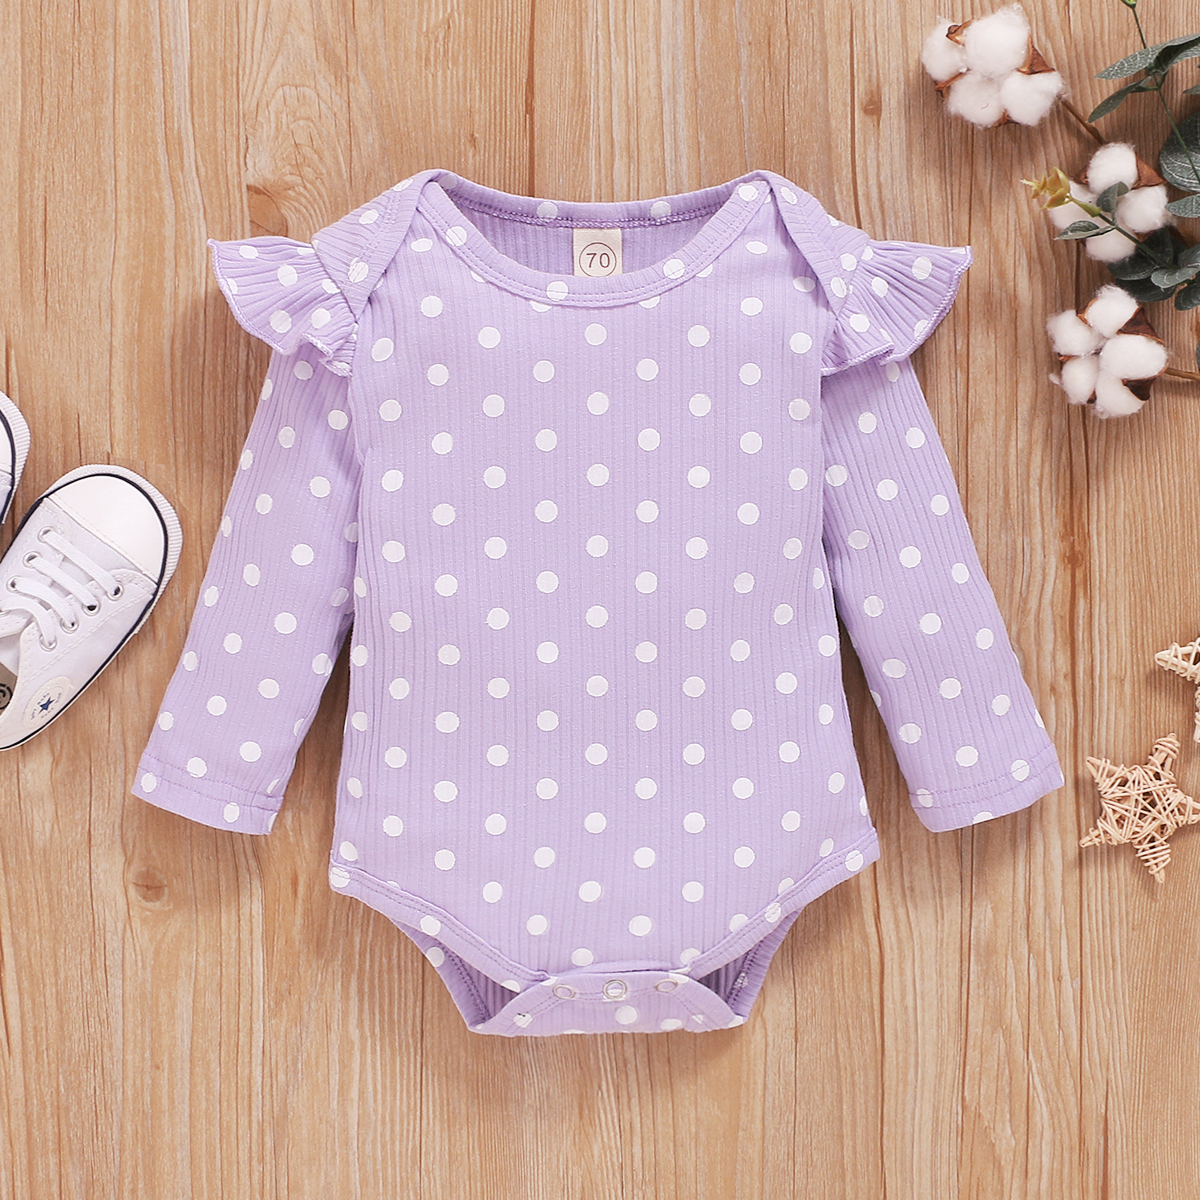 Newborn Baby Girls Long Sleeve Polka Dot Romper Fashion Romper for Toddler Baby Girls Spring Autumn Jumpsuits Clothing